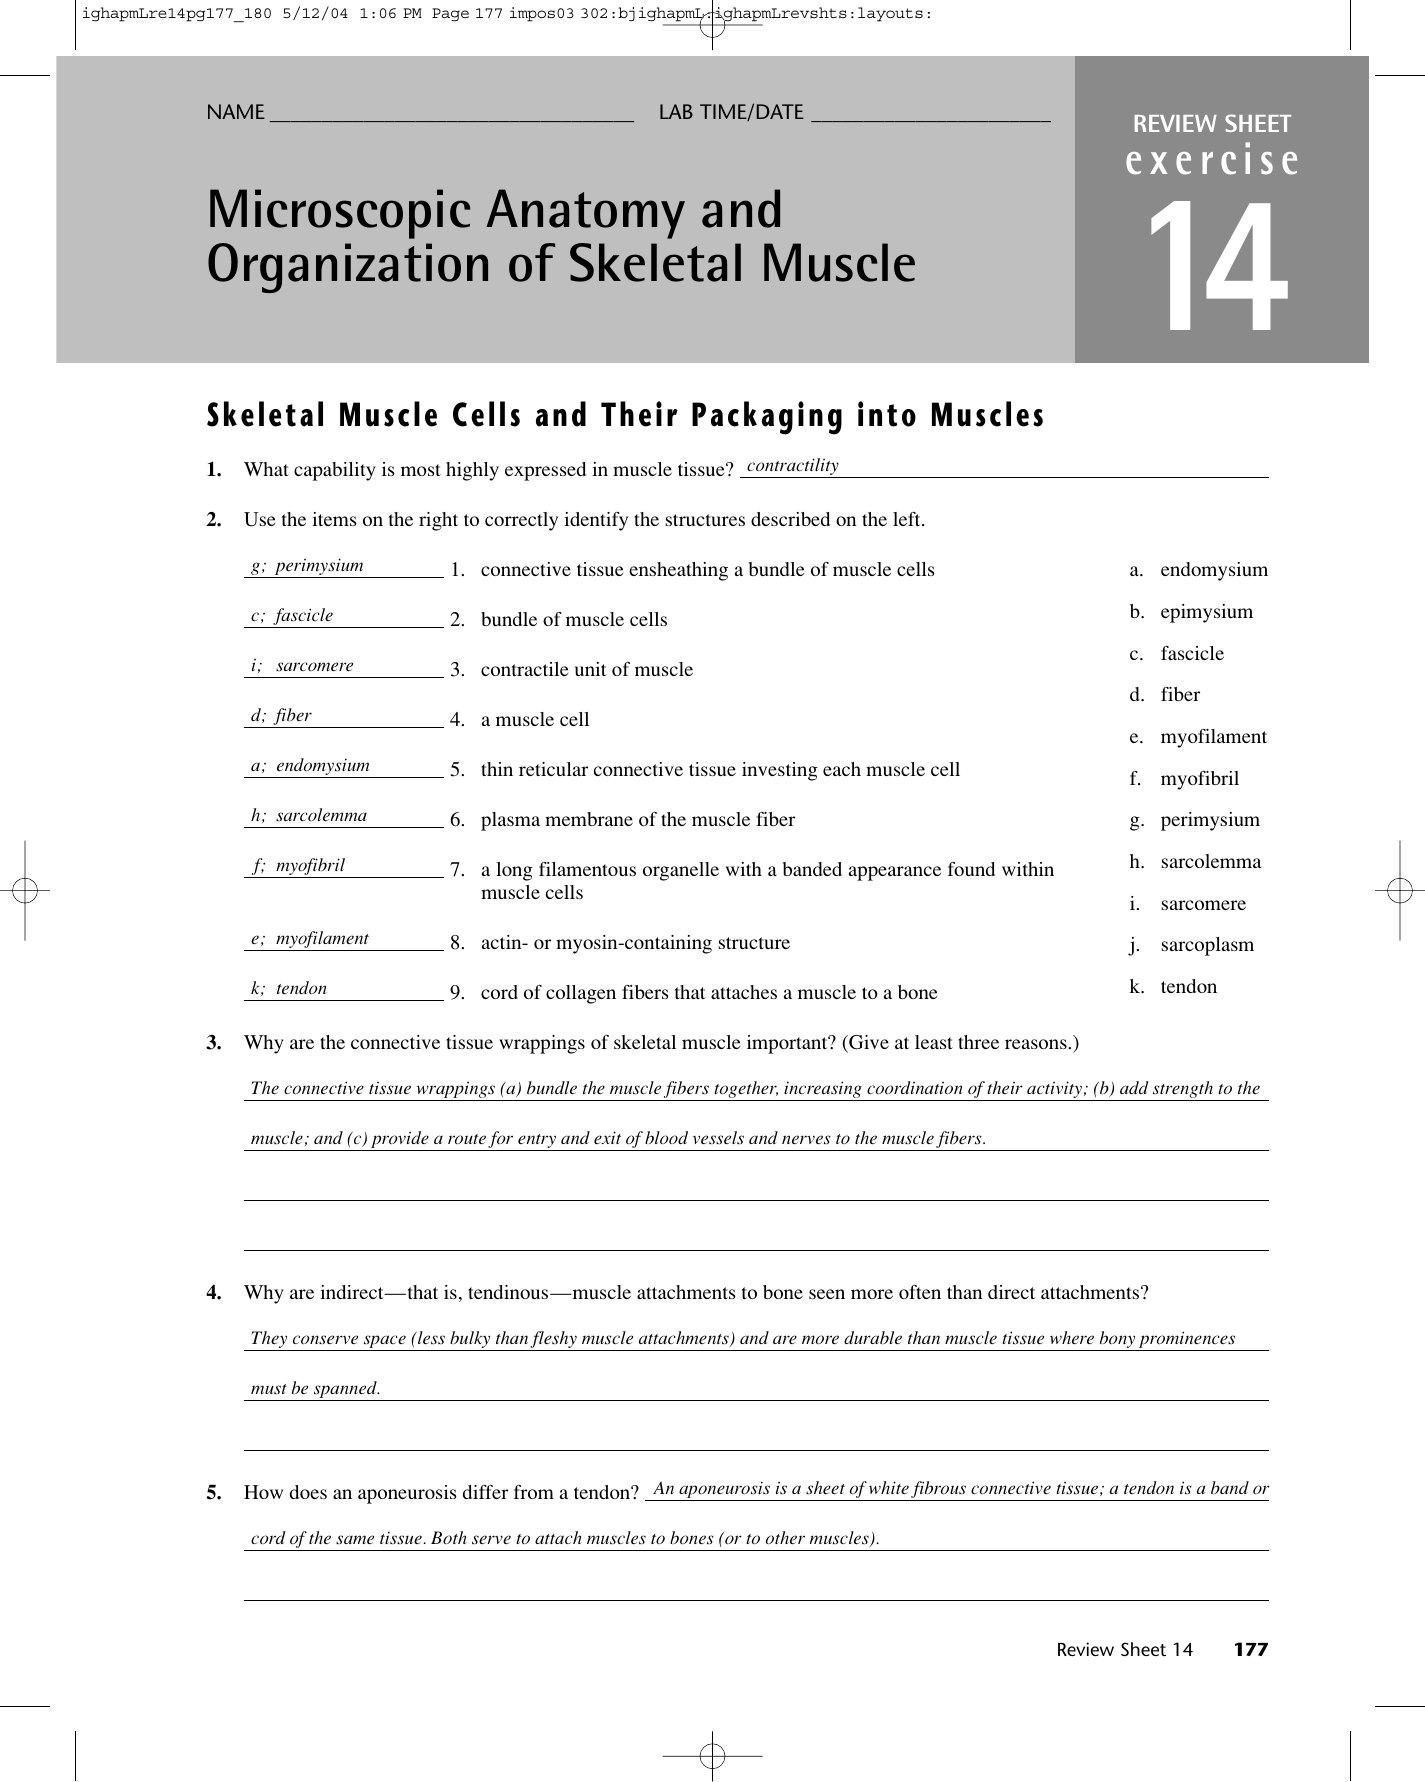 Exercise 12 Microscopic Anatomy And Organization Of Skeletal Muscle